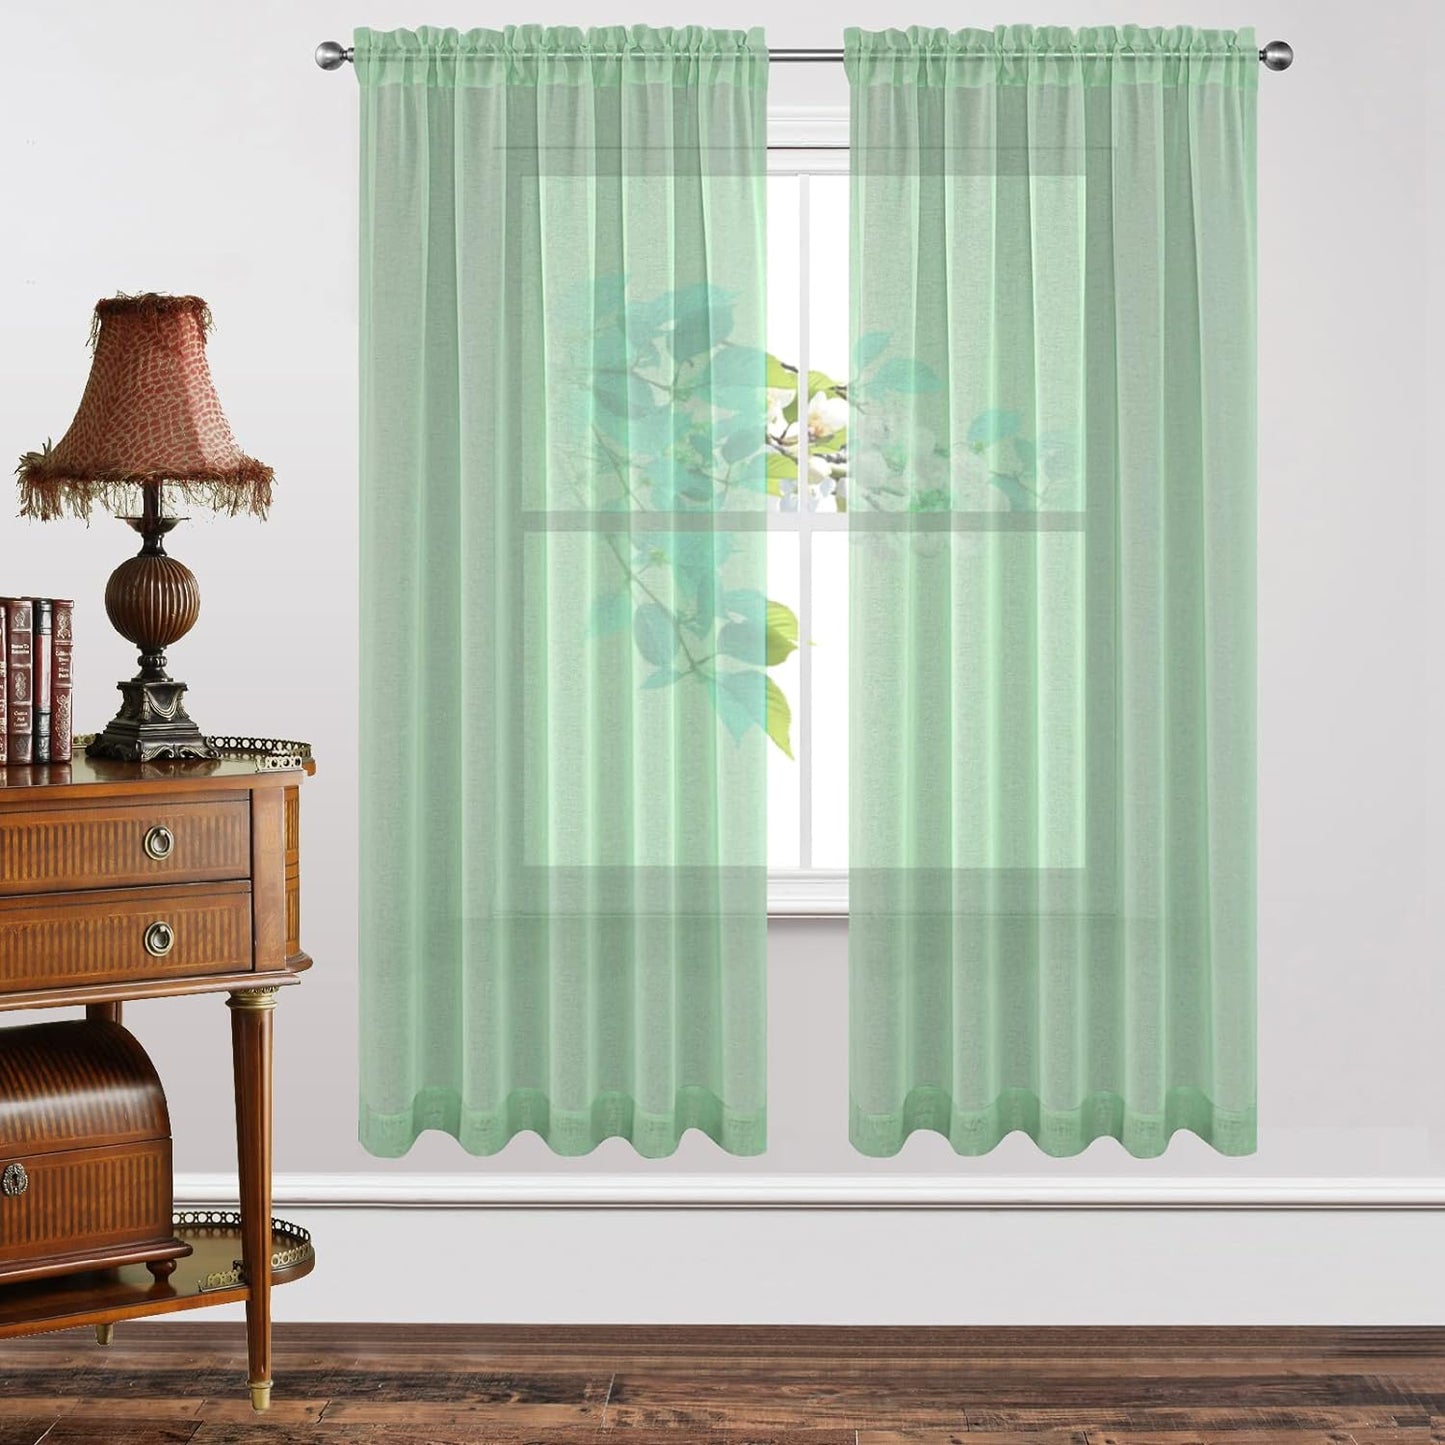 Joydeco White Sheer Curtains 63 Inch Length 2 Panels Set, Rod Pocket Long Sheer Curtains for Window Bedroom Living Room, Lightweight Semi Drape Panels for Yard Patio (54X63 Inch, off White)  Joydeco Mint Green 54W X 72L Inch X 2 Panels 